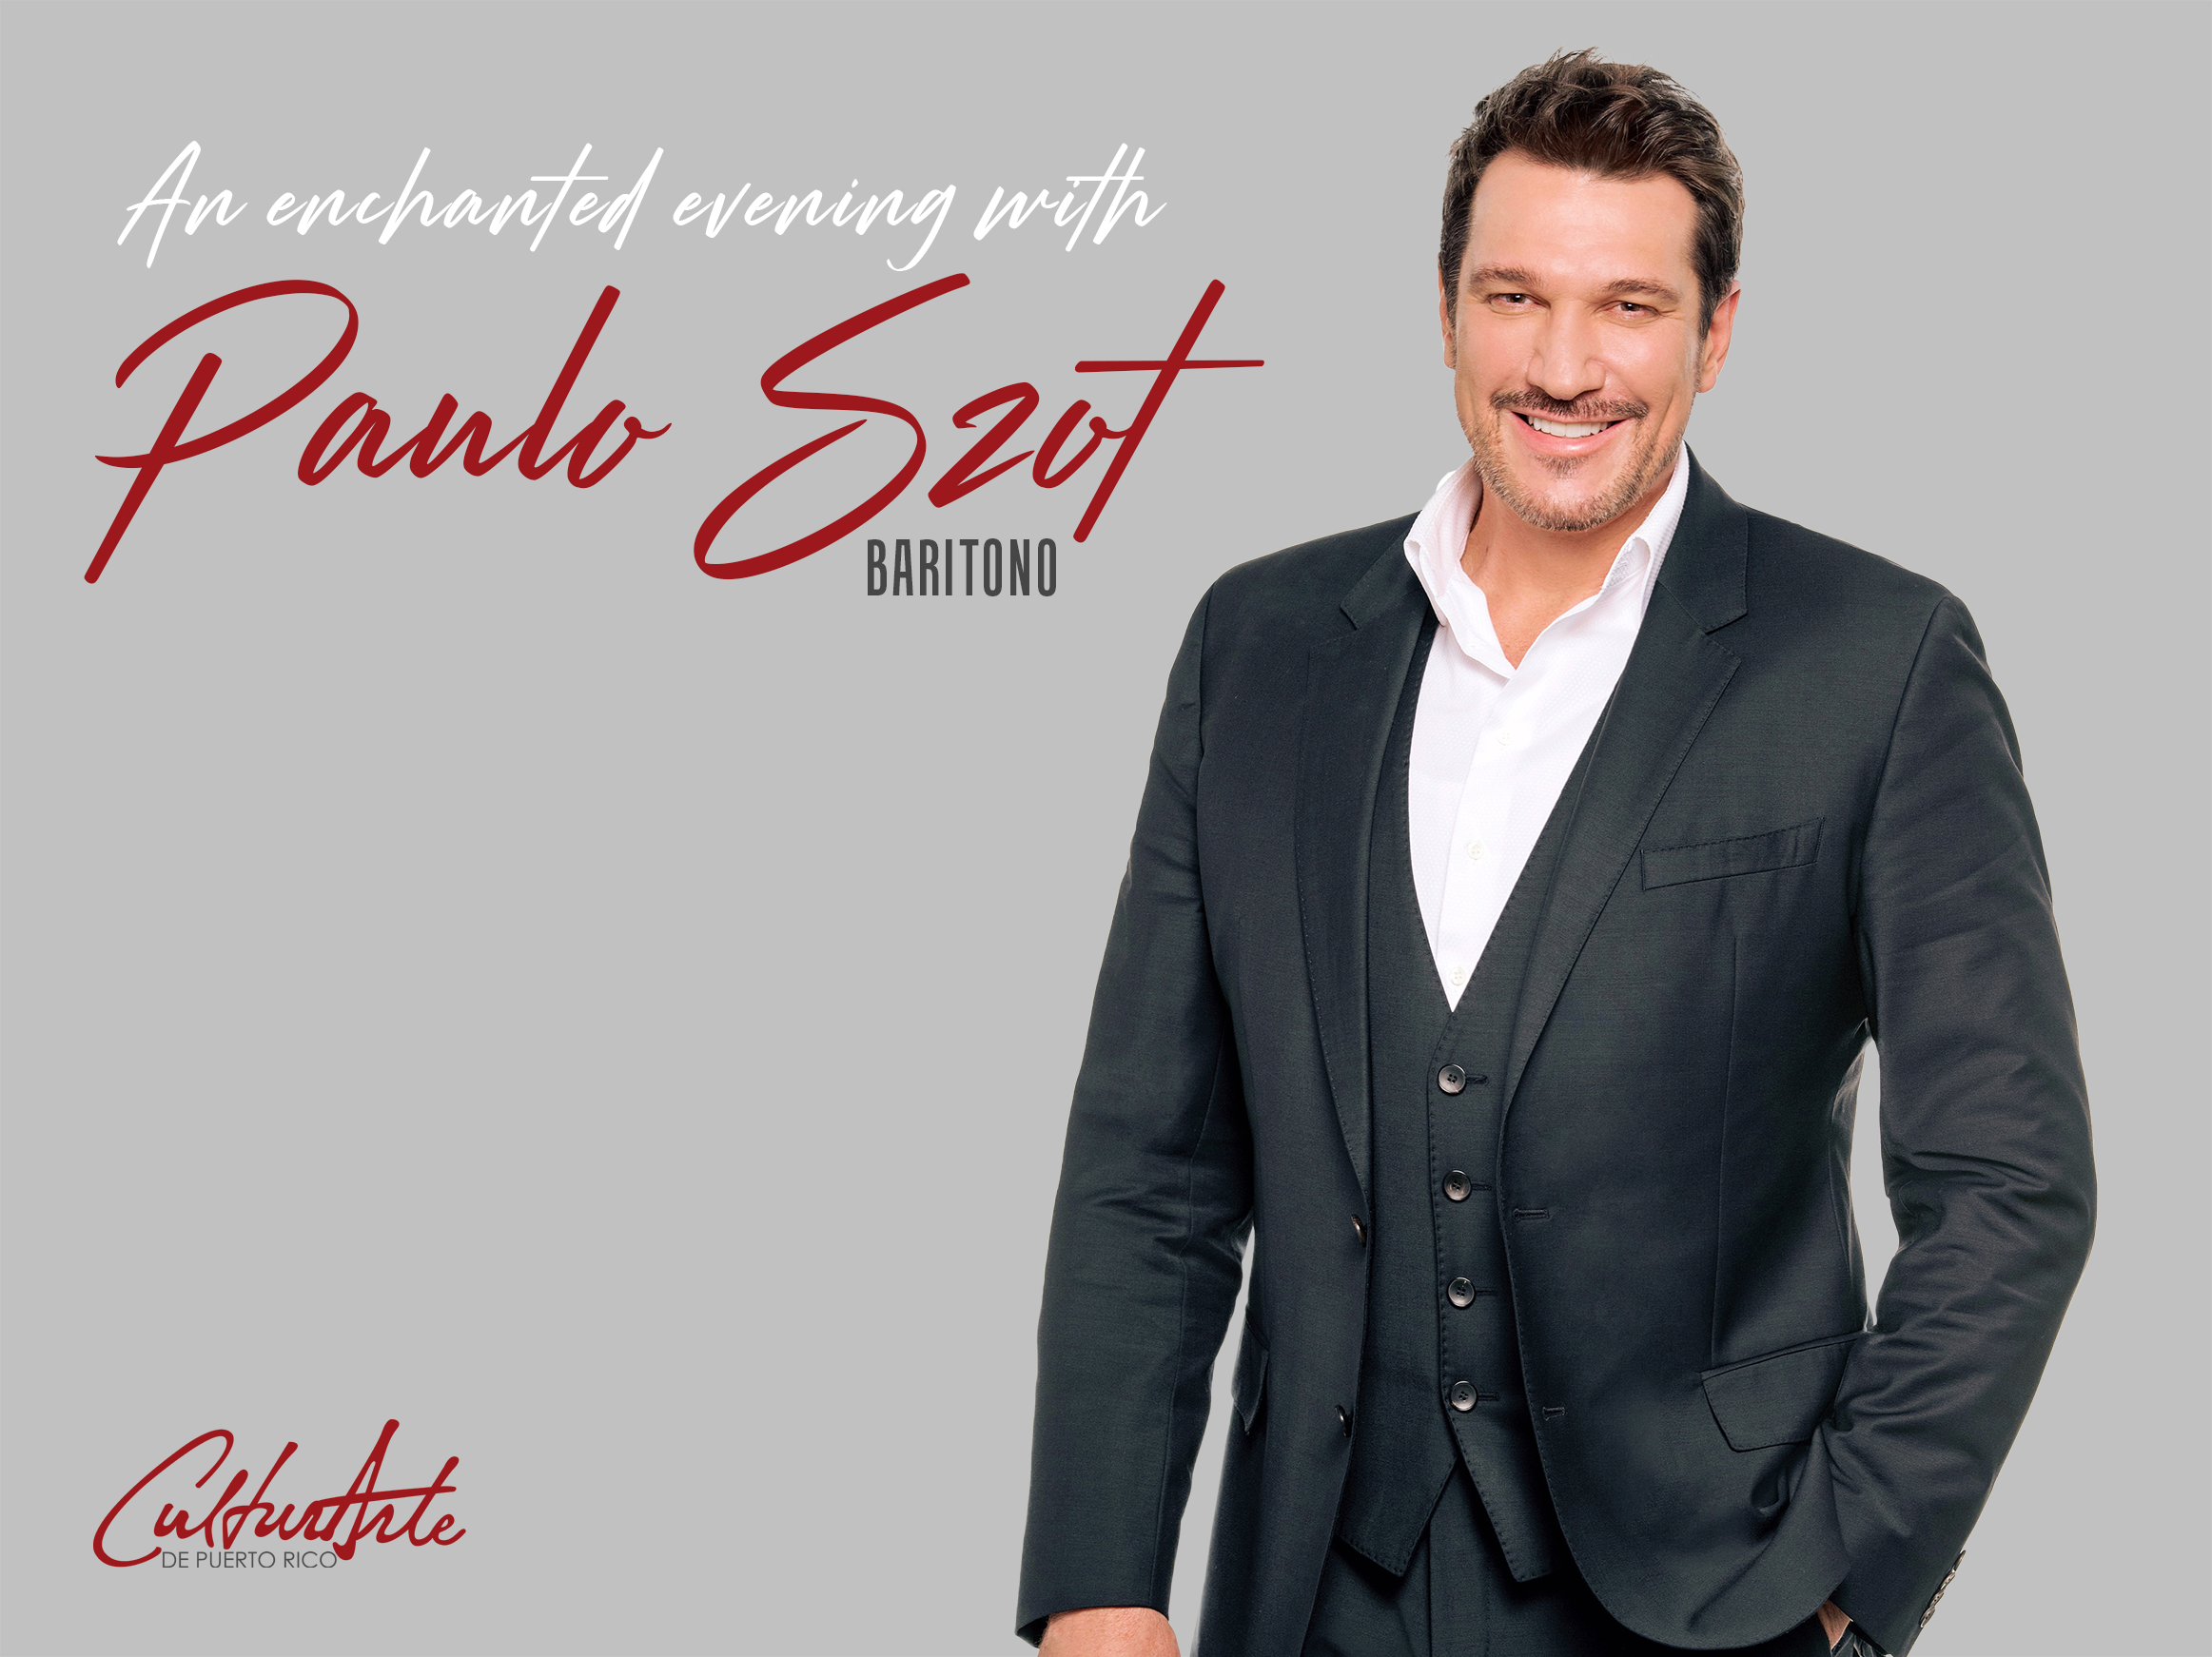 An enchanted evening with Paulo Szot